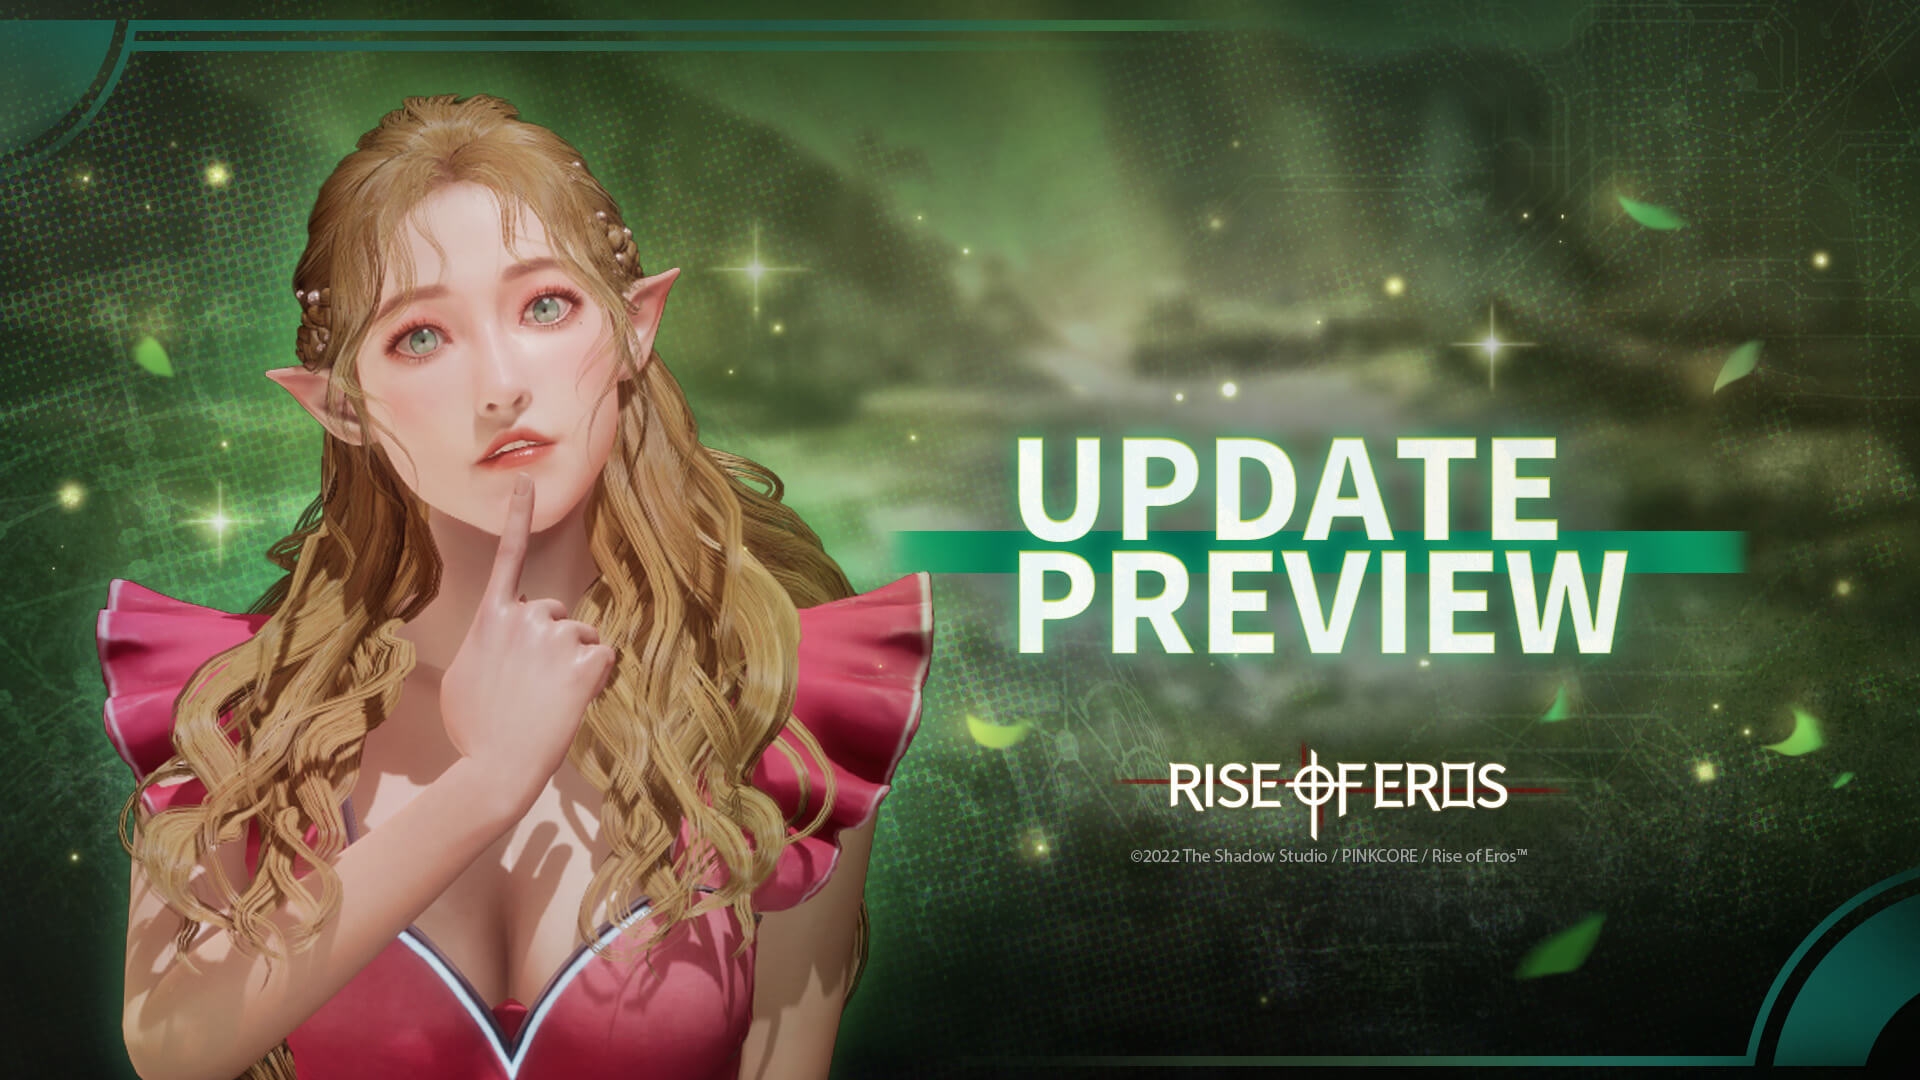 03/21 Update Preview